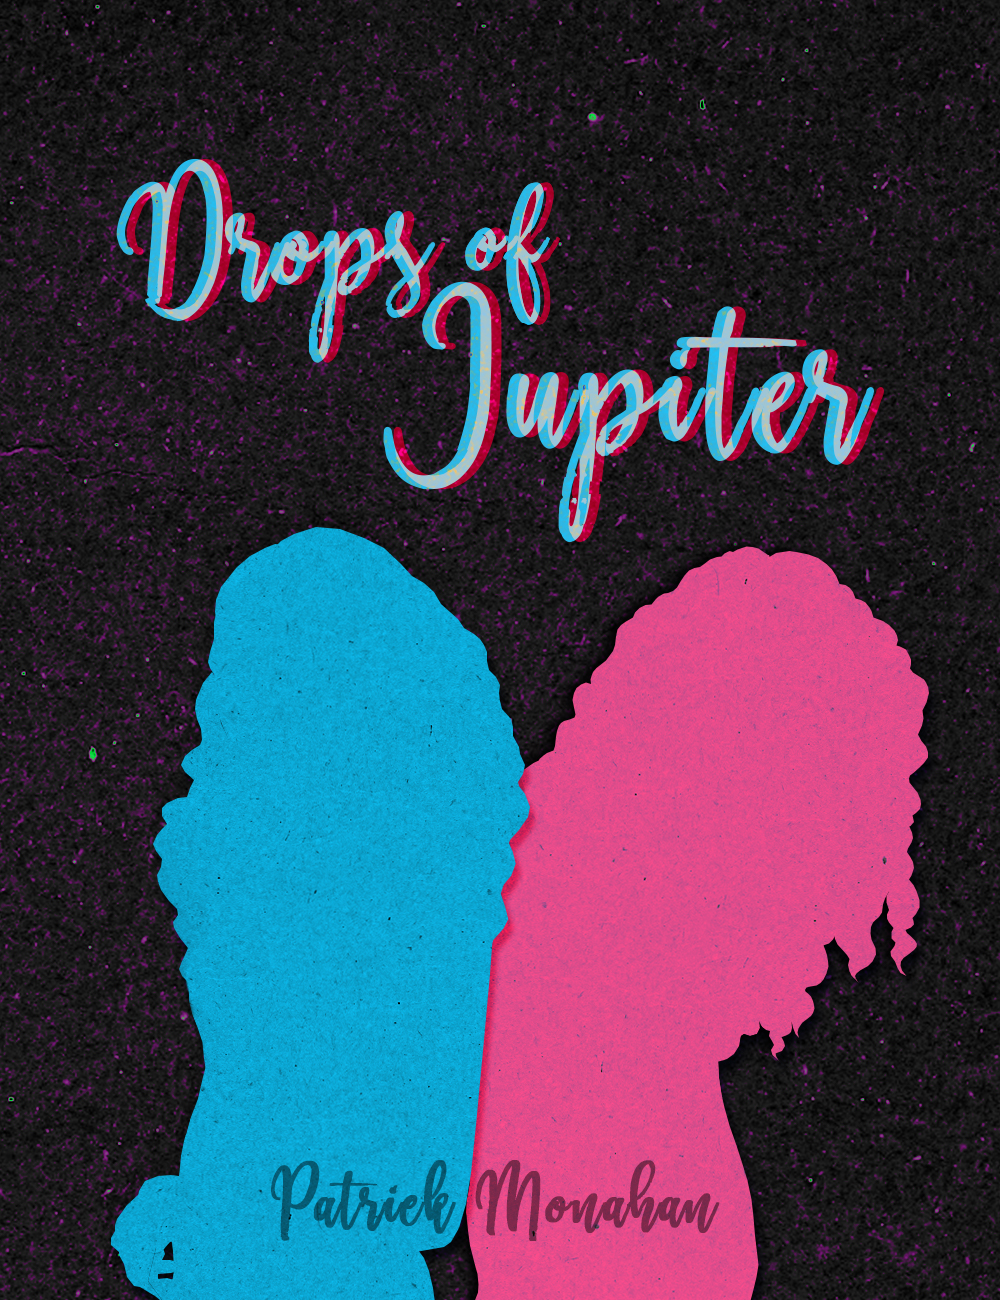 A book covering with a starry background and the shapes of two girls standing back to back. The girls'shapes are raised above the background and textured like paper. Above them is the title "Drops of Jupiter" in a loopy handwritten font.